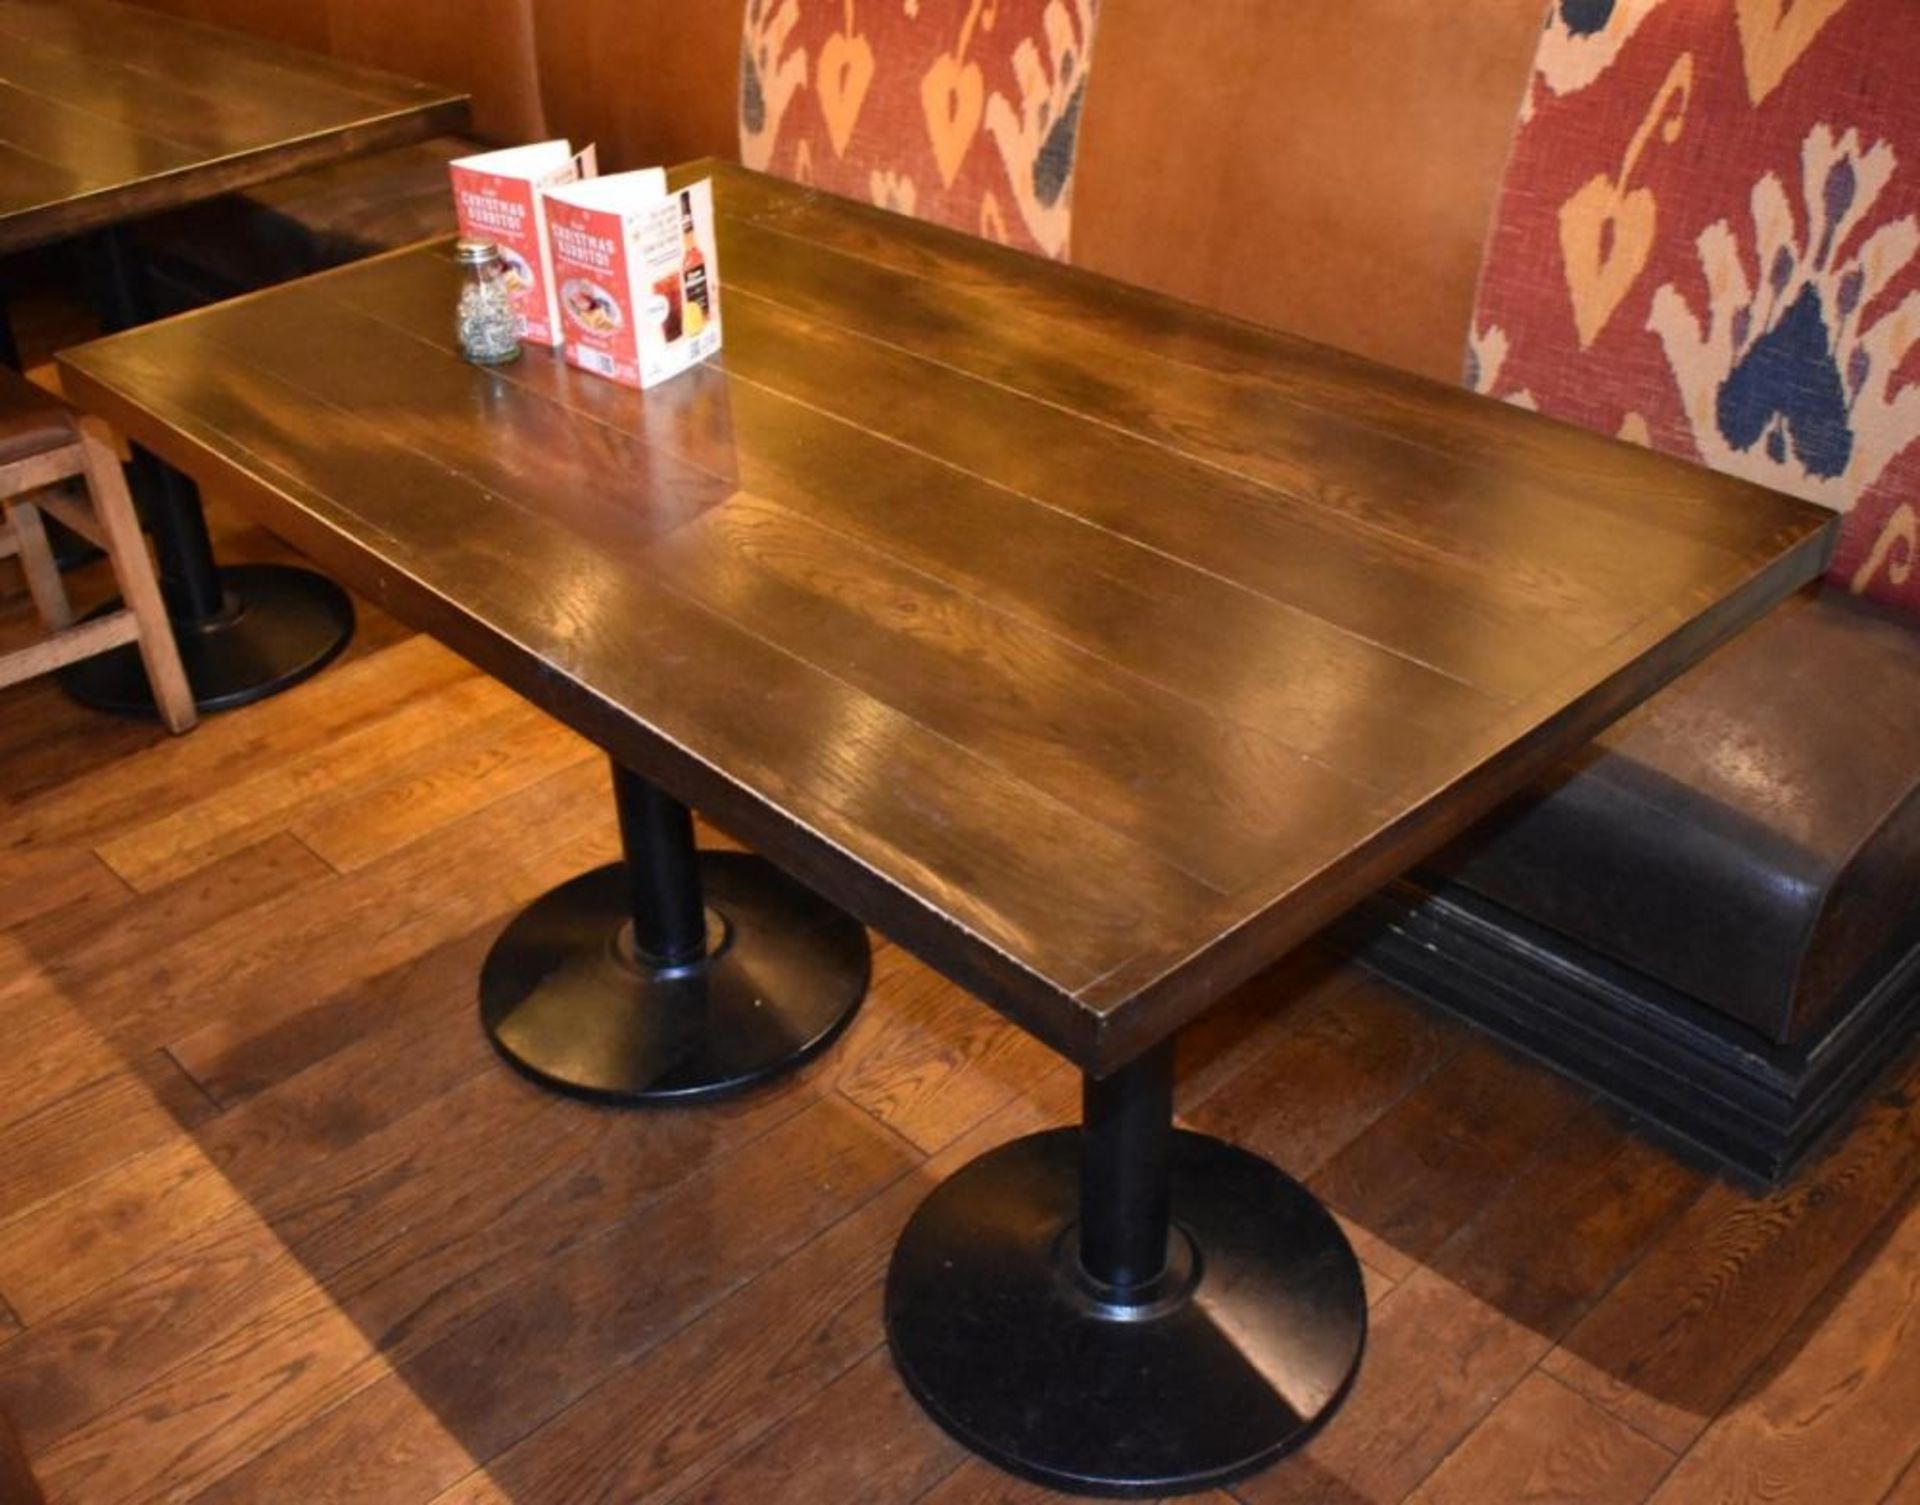 7 x Rectangular Dining Tables With Twin Black Pedestals and Dark Wood Panel Effect Table Tops - H77 - Image 2 of 3